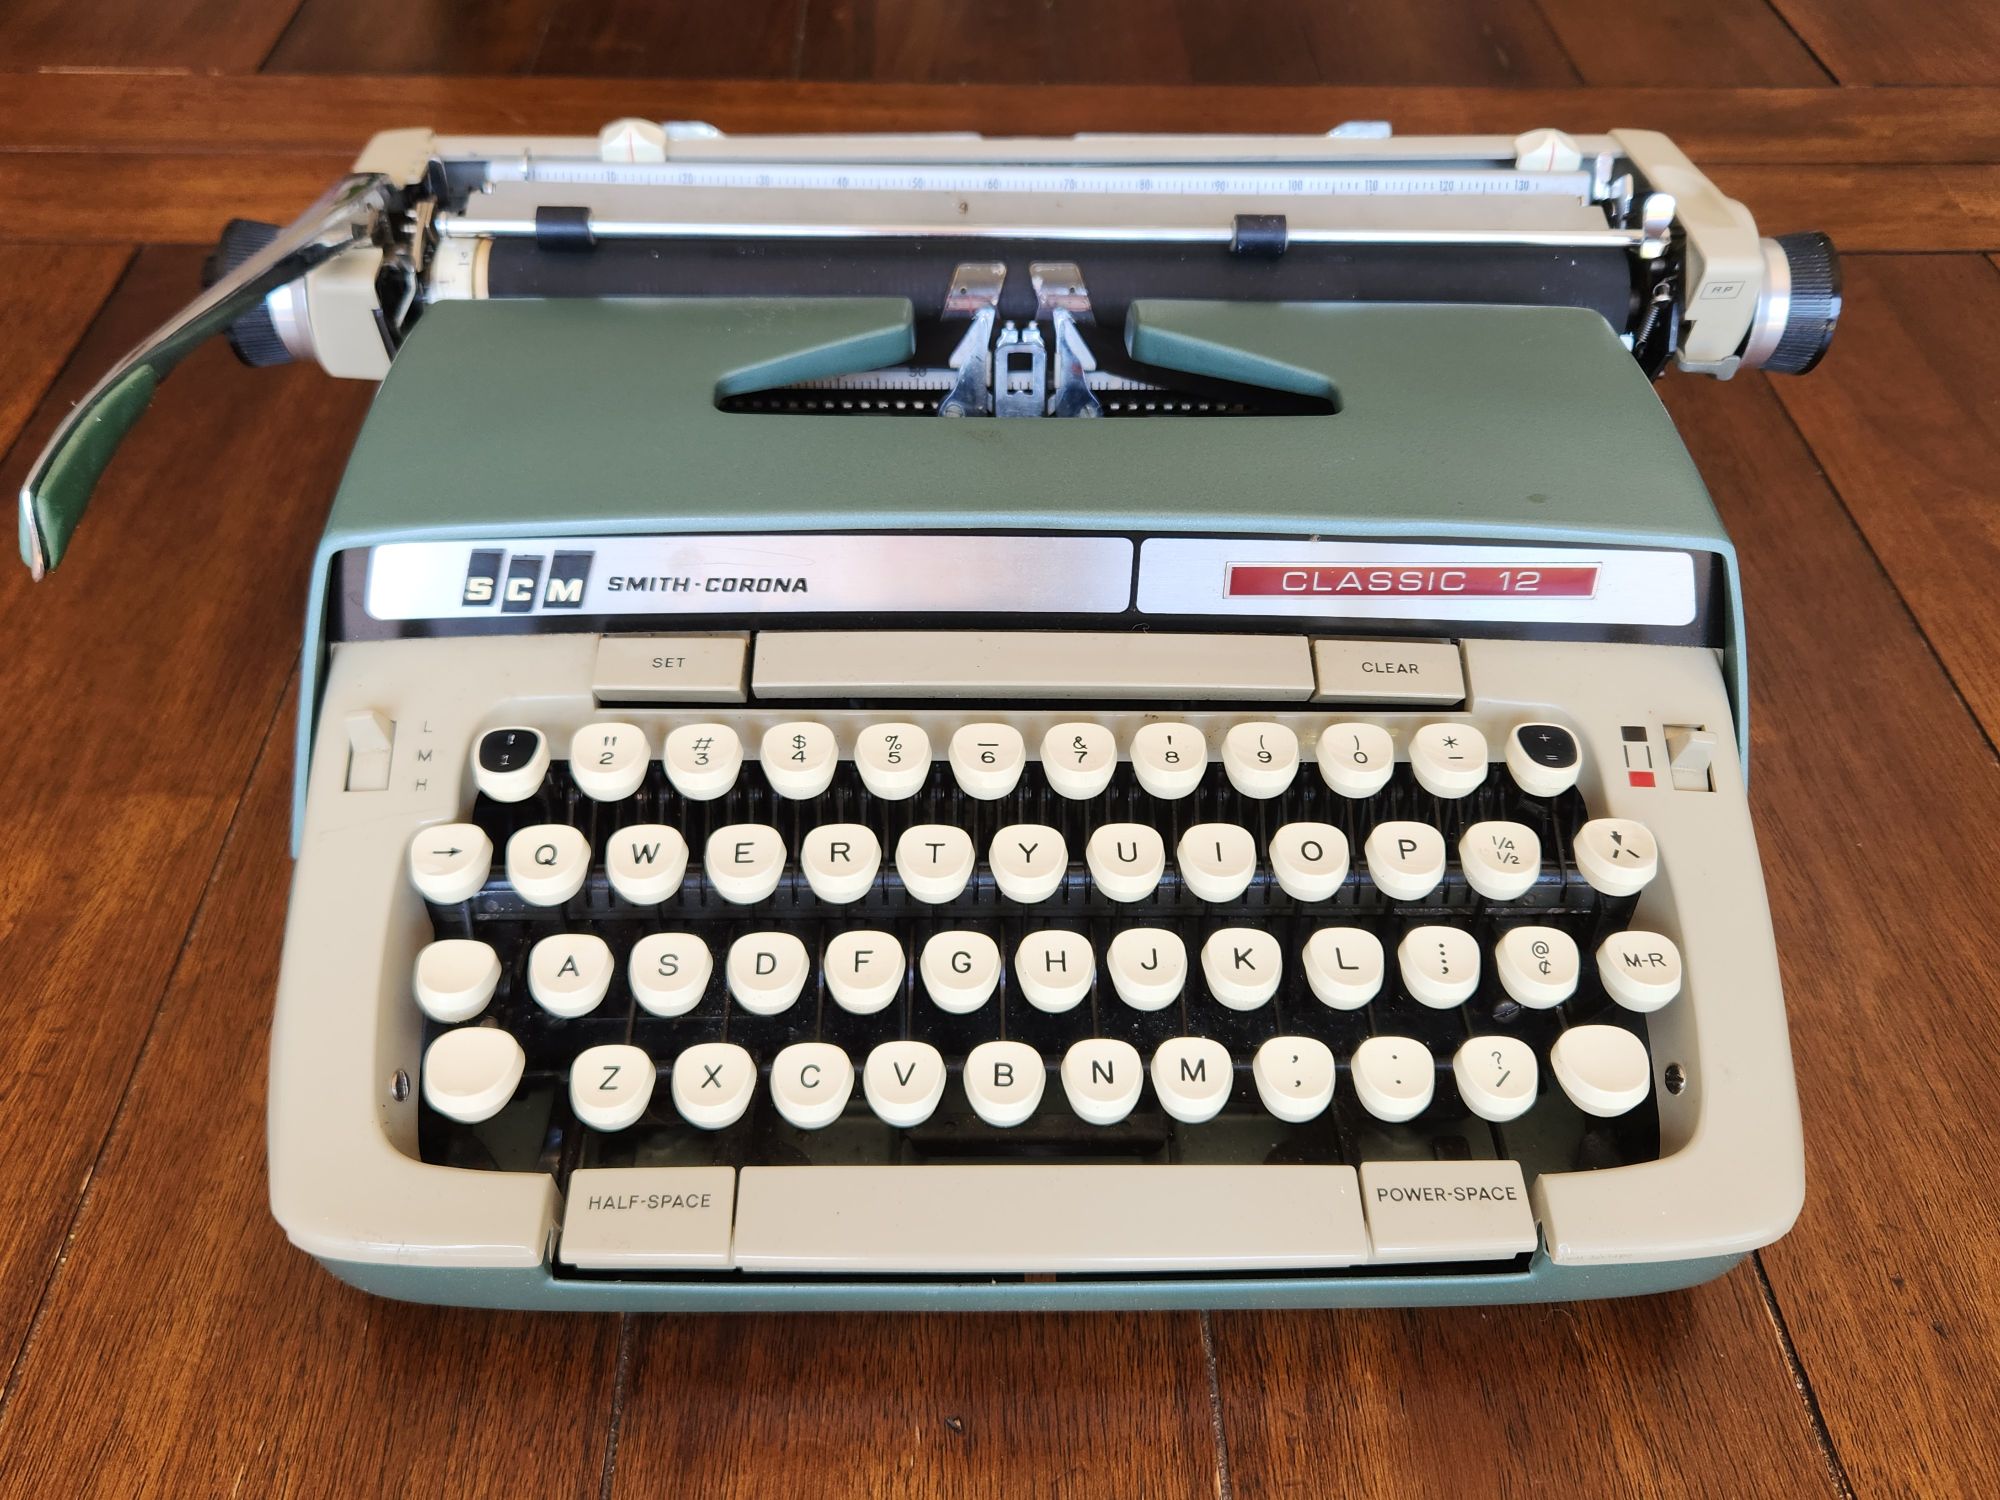 Green SCM typewriter from the mid-1960s